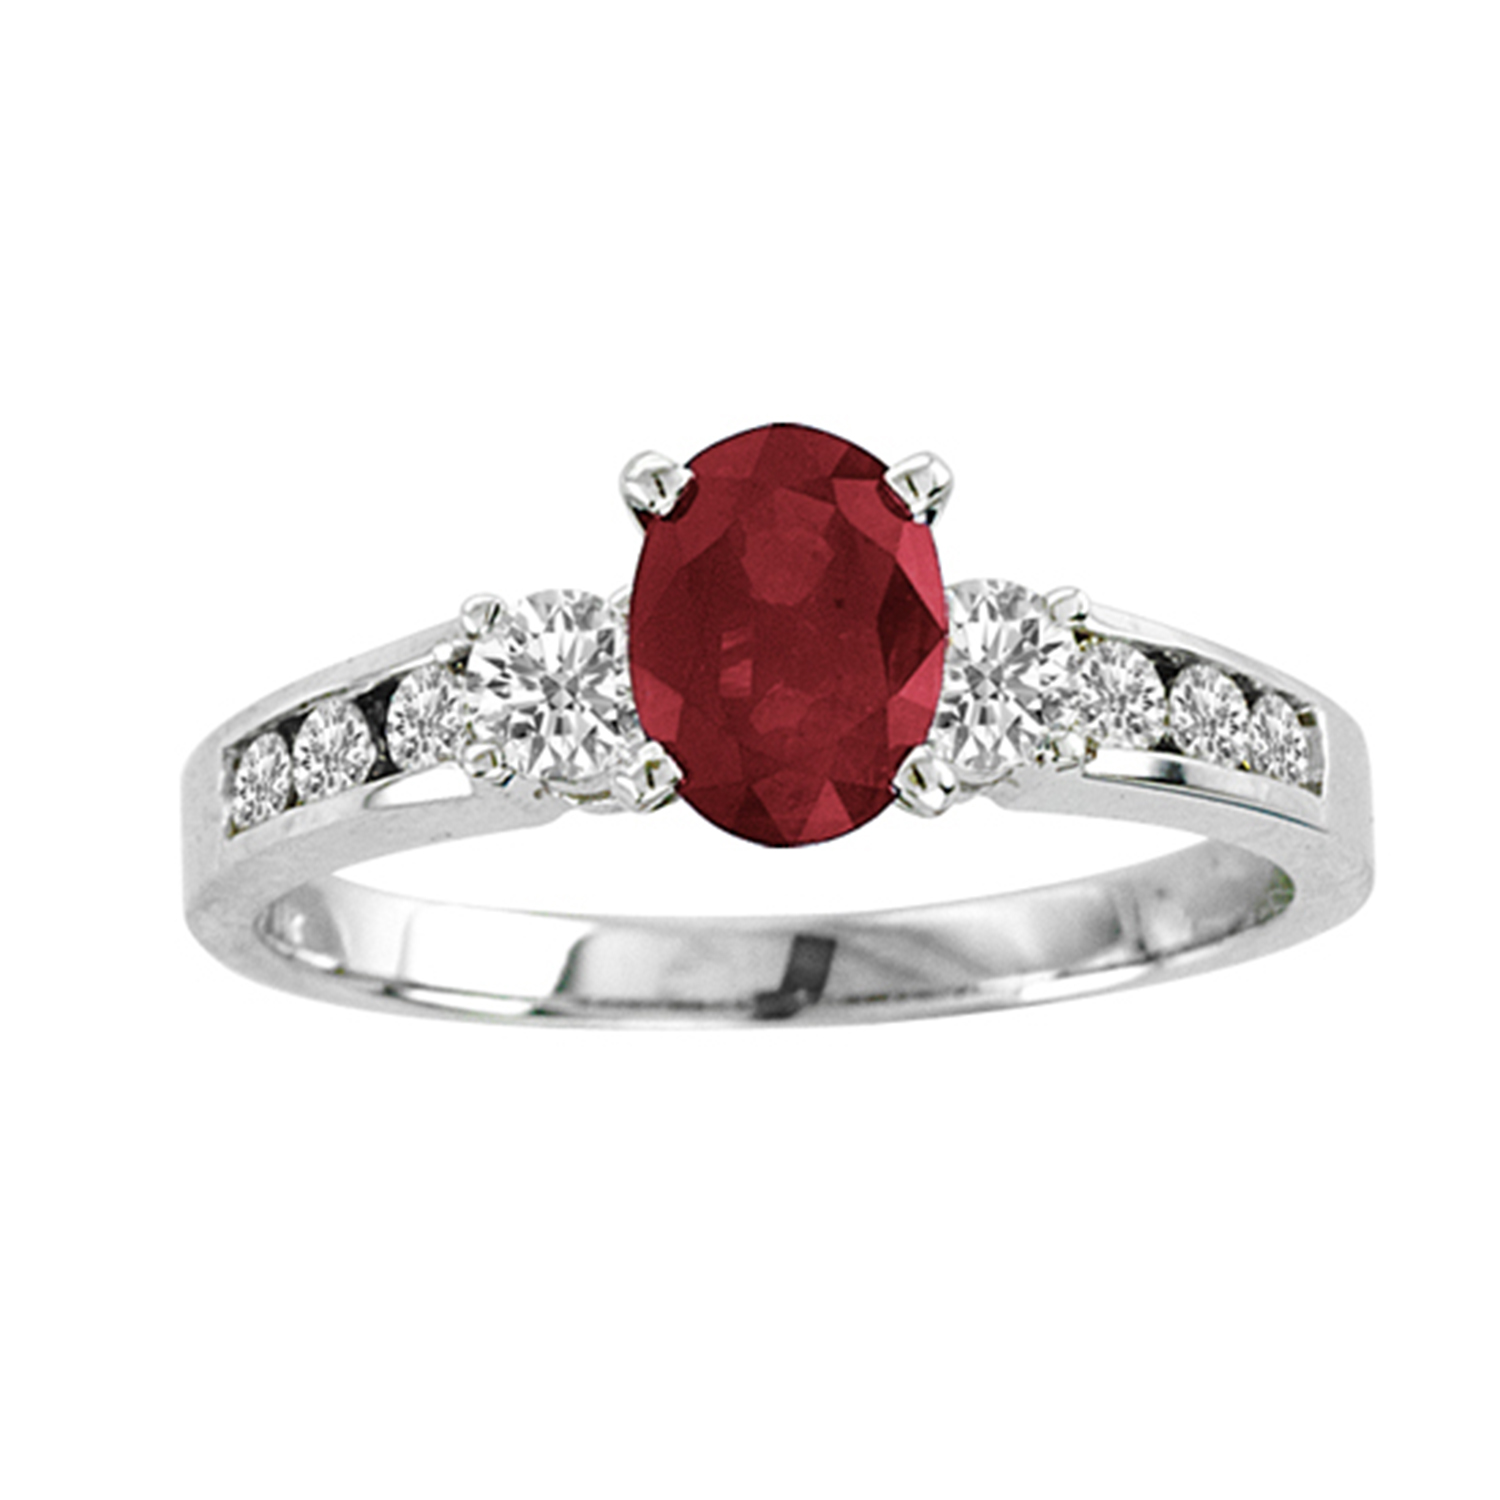 View 0.40ctw Diamond and Ruby Engagement Ring in 14k Gold